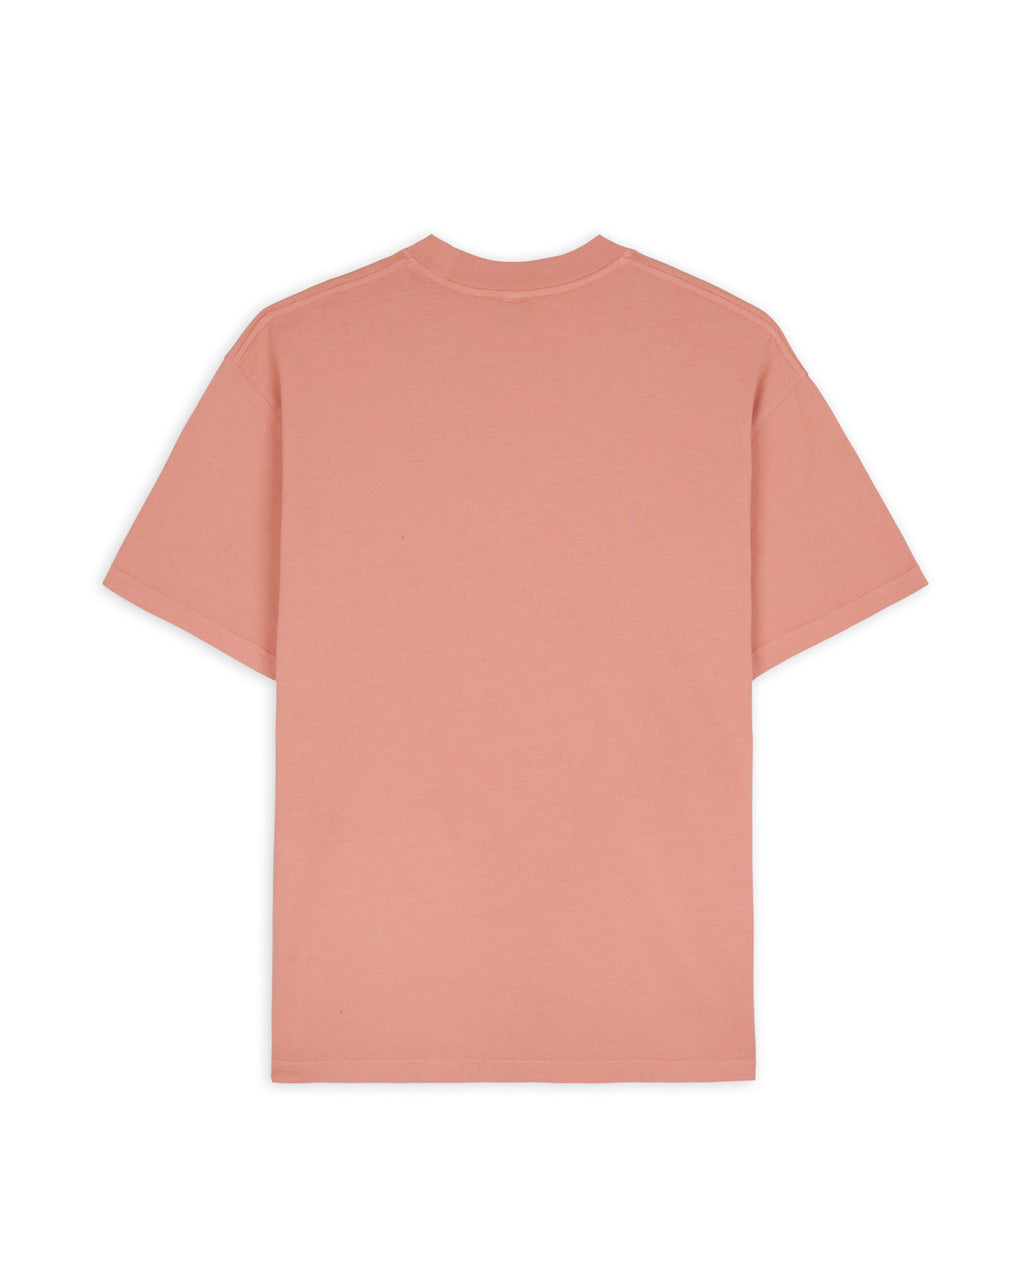 Pastoral Encounters T-shirt - Dusty Rose 2